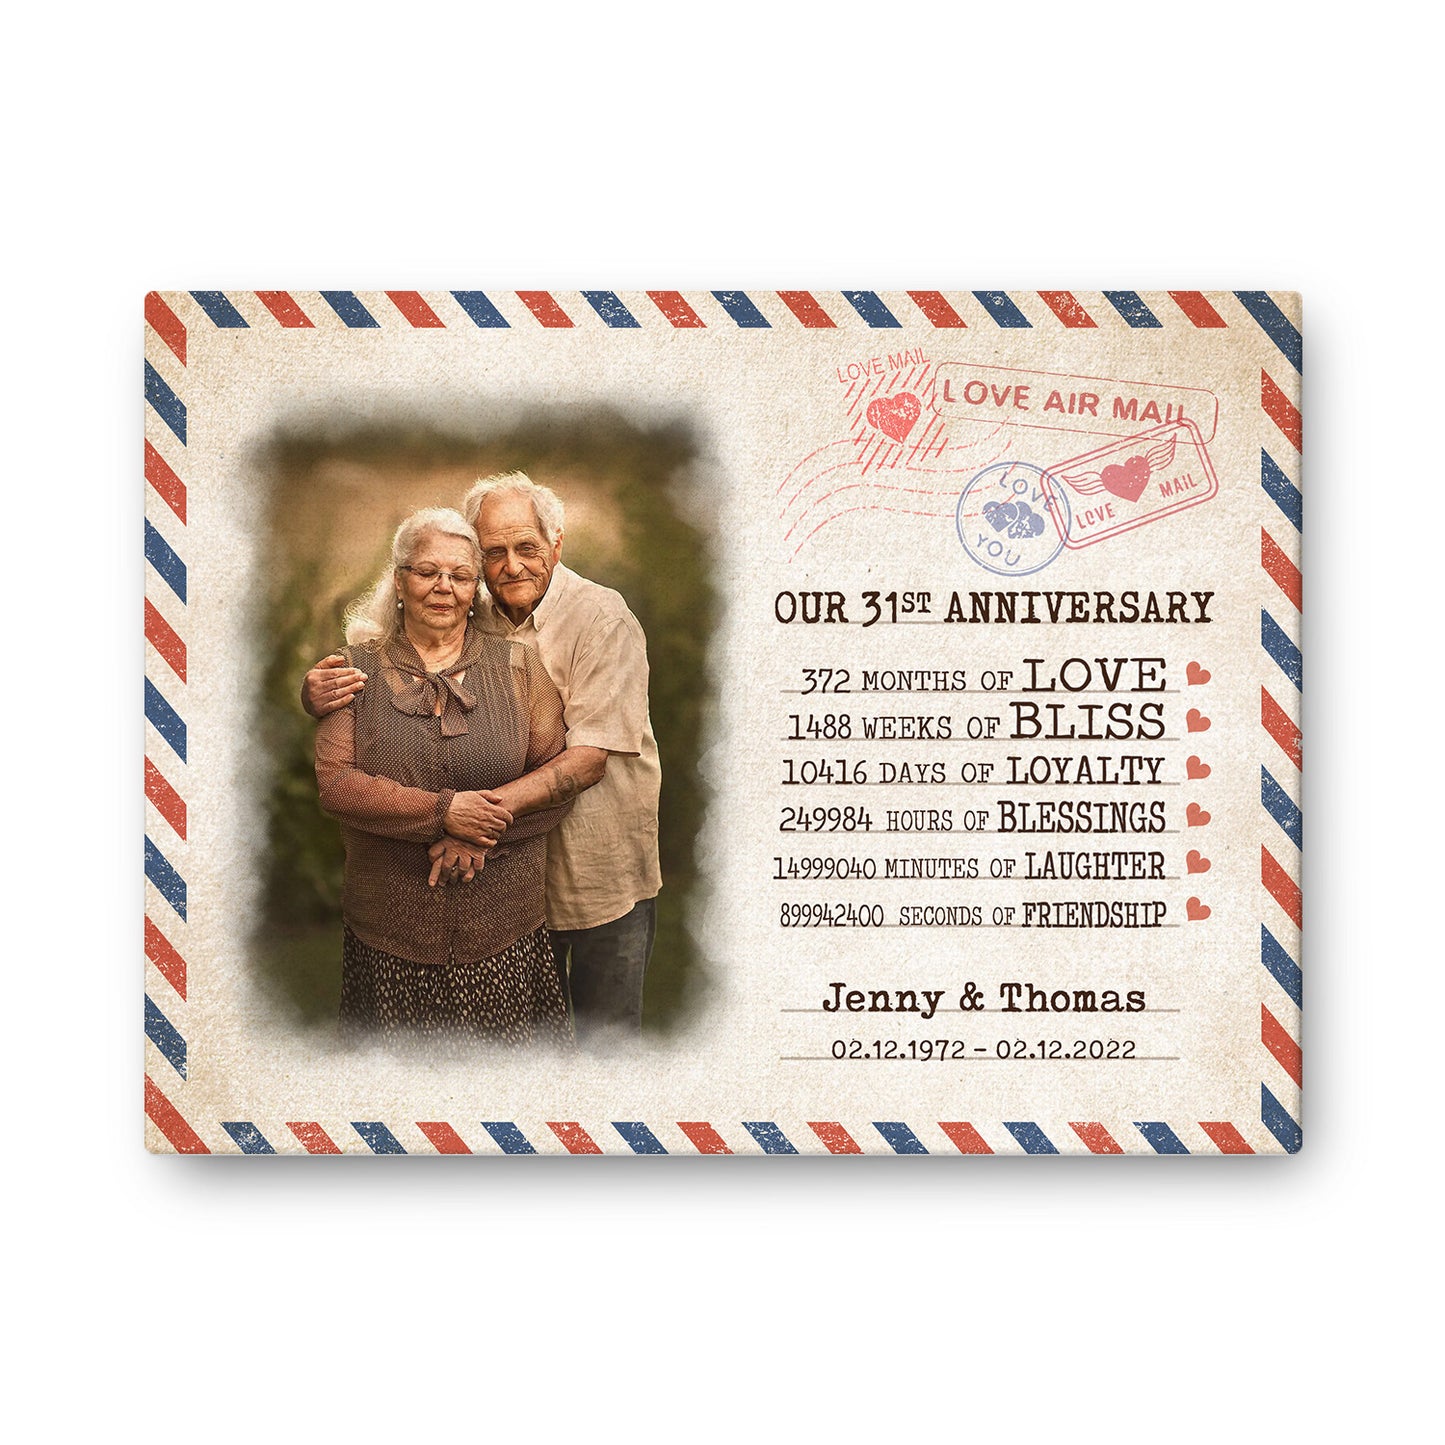 Our 31st Anniversary Letter Valentine Gift Personalized Canvas